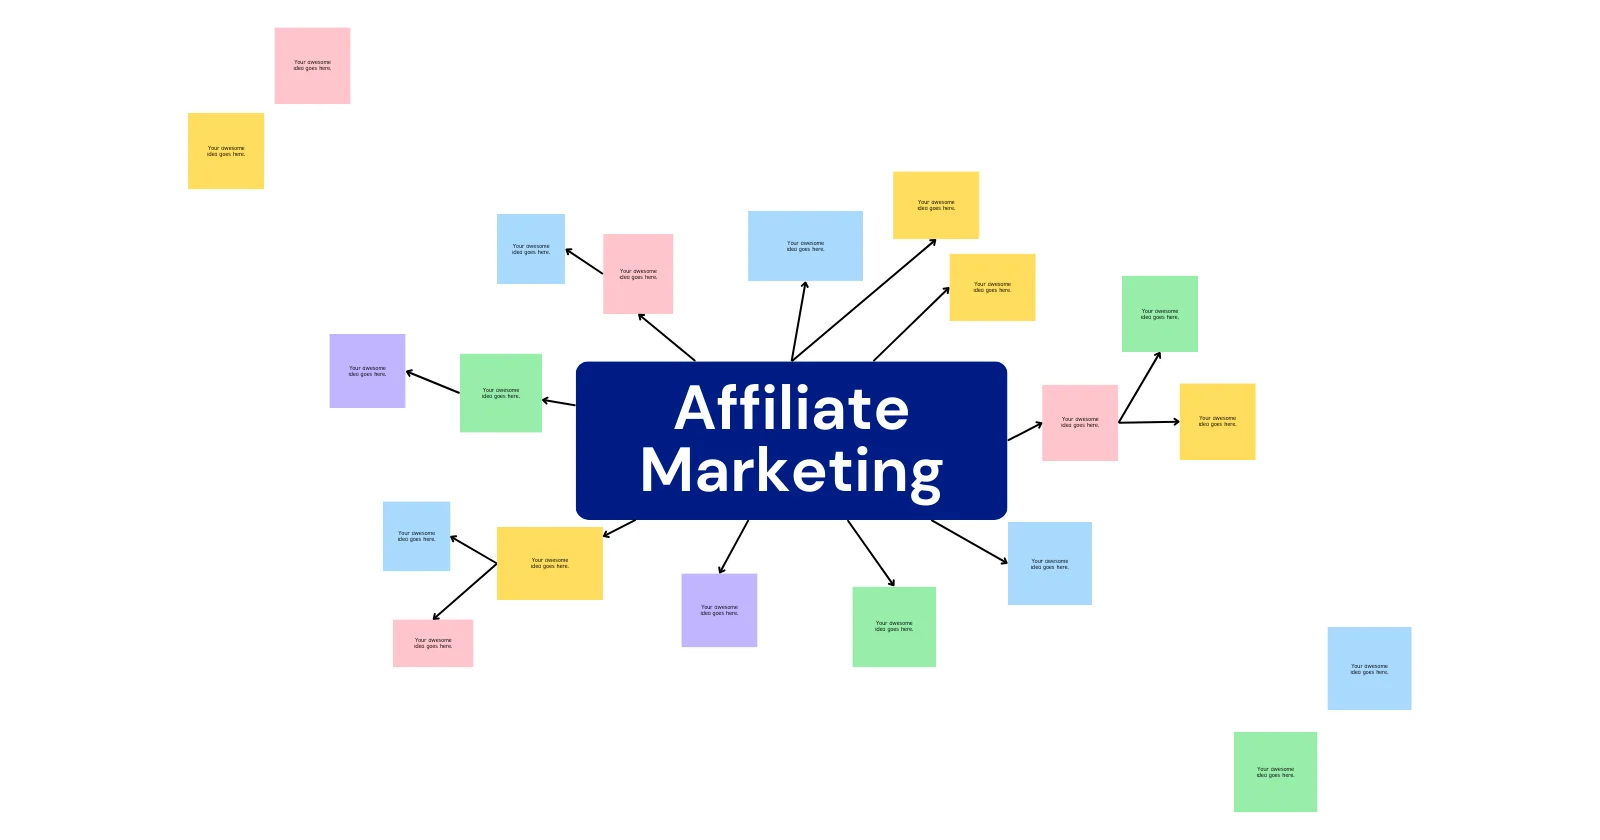 Affiliate marketing is a performance-based marketing strategy where you promote other people's products or services in exchange for a commission on each sale that you generate. It's a great way to make money online, and it's also a great way to grow your business.